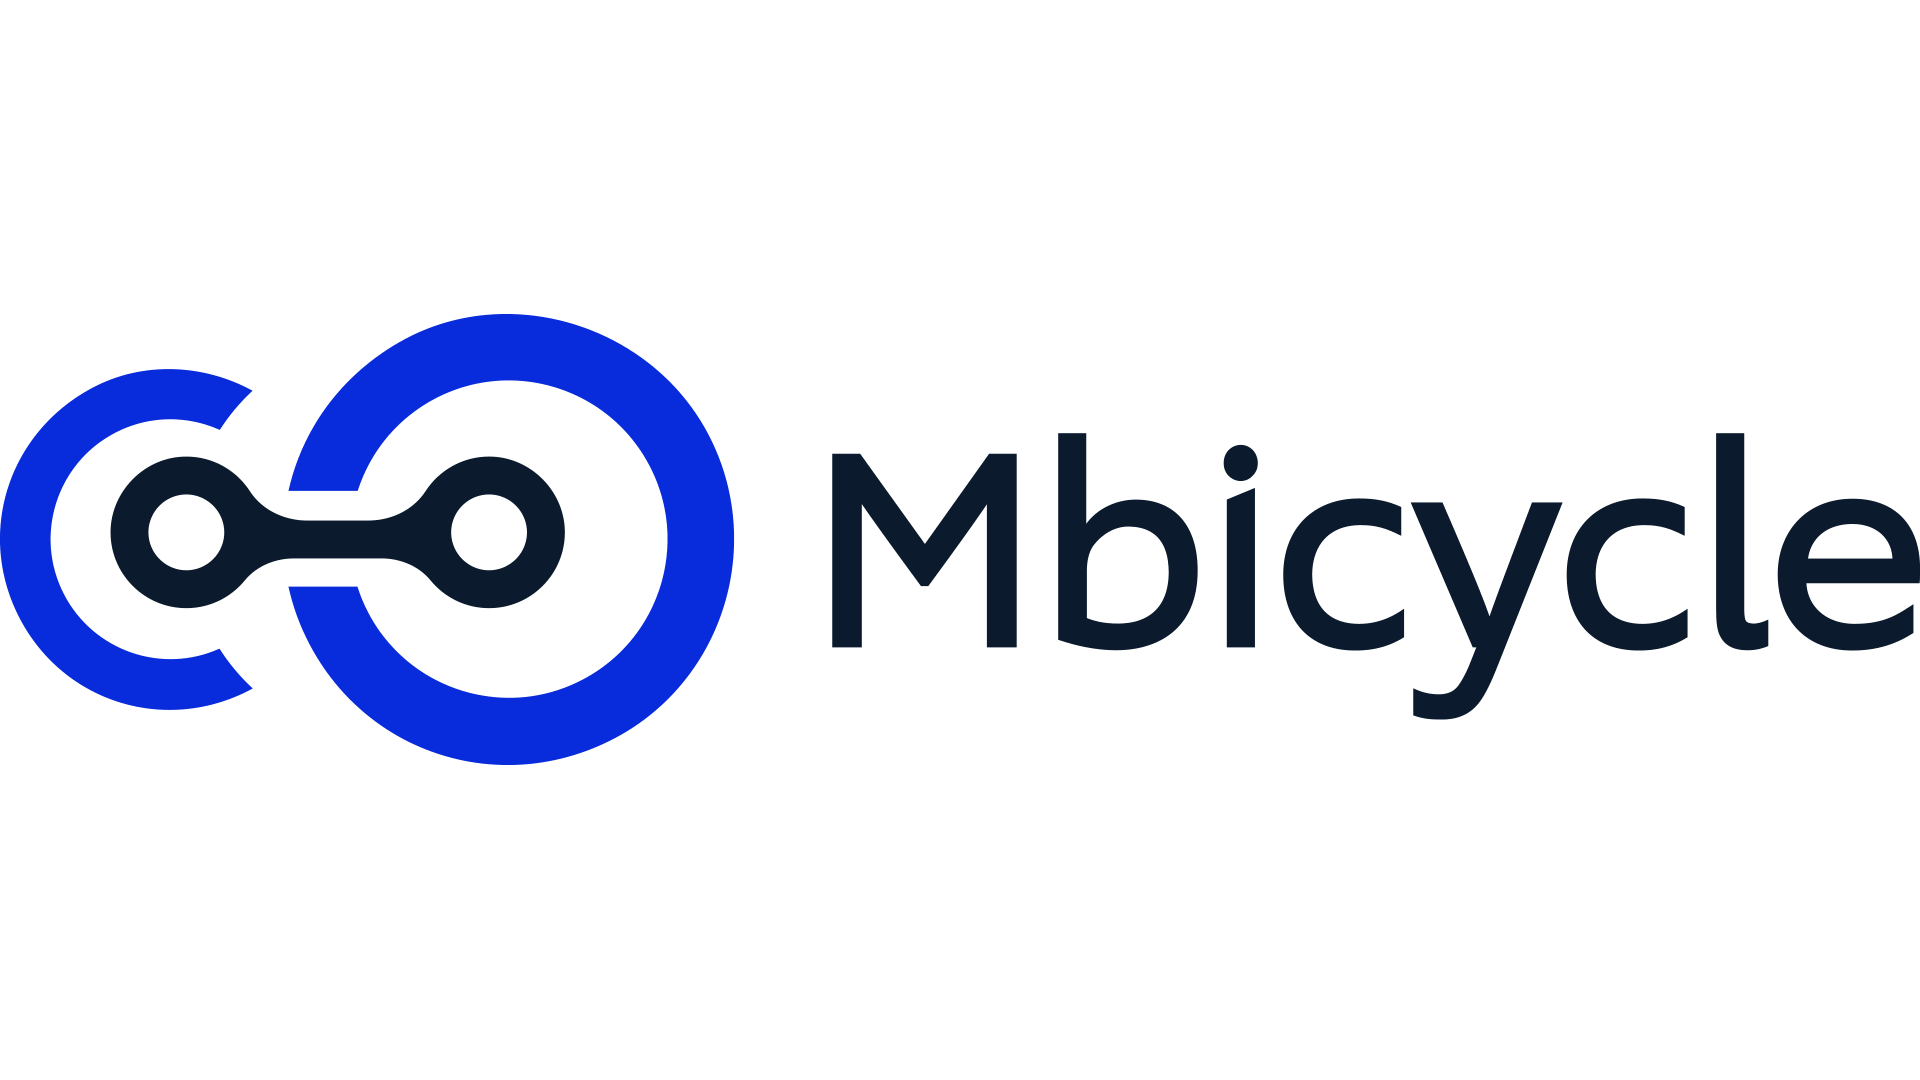 MBicycle